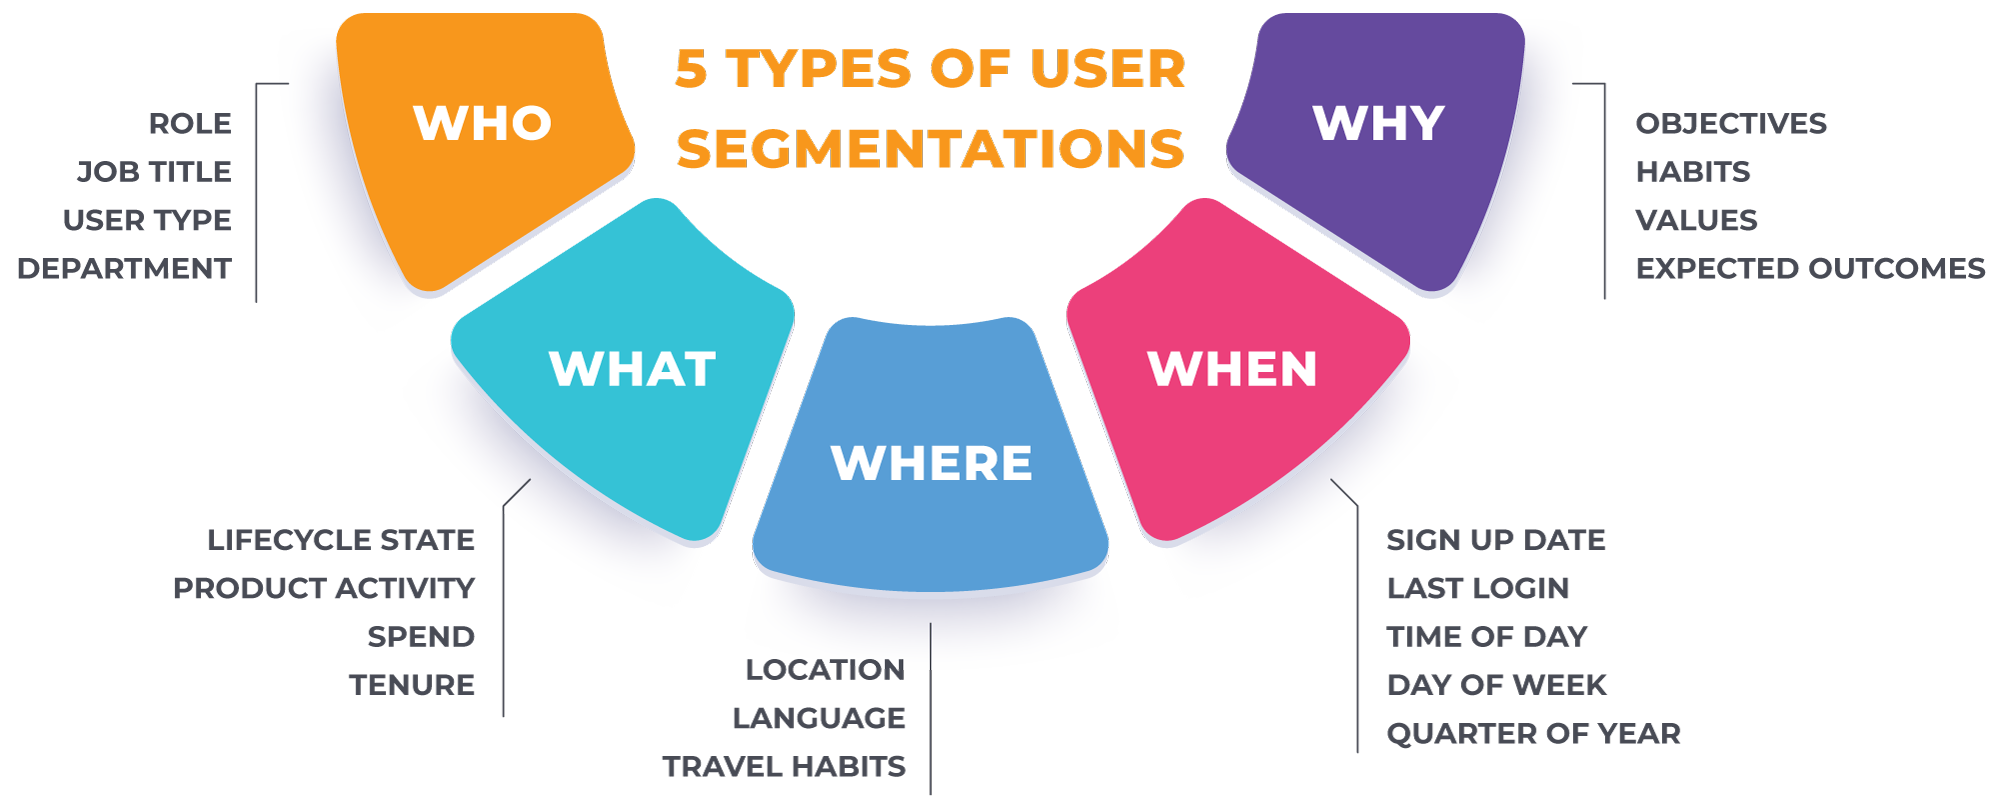 Image showing different segmentation types and attributes